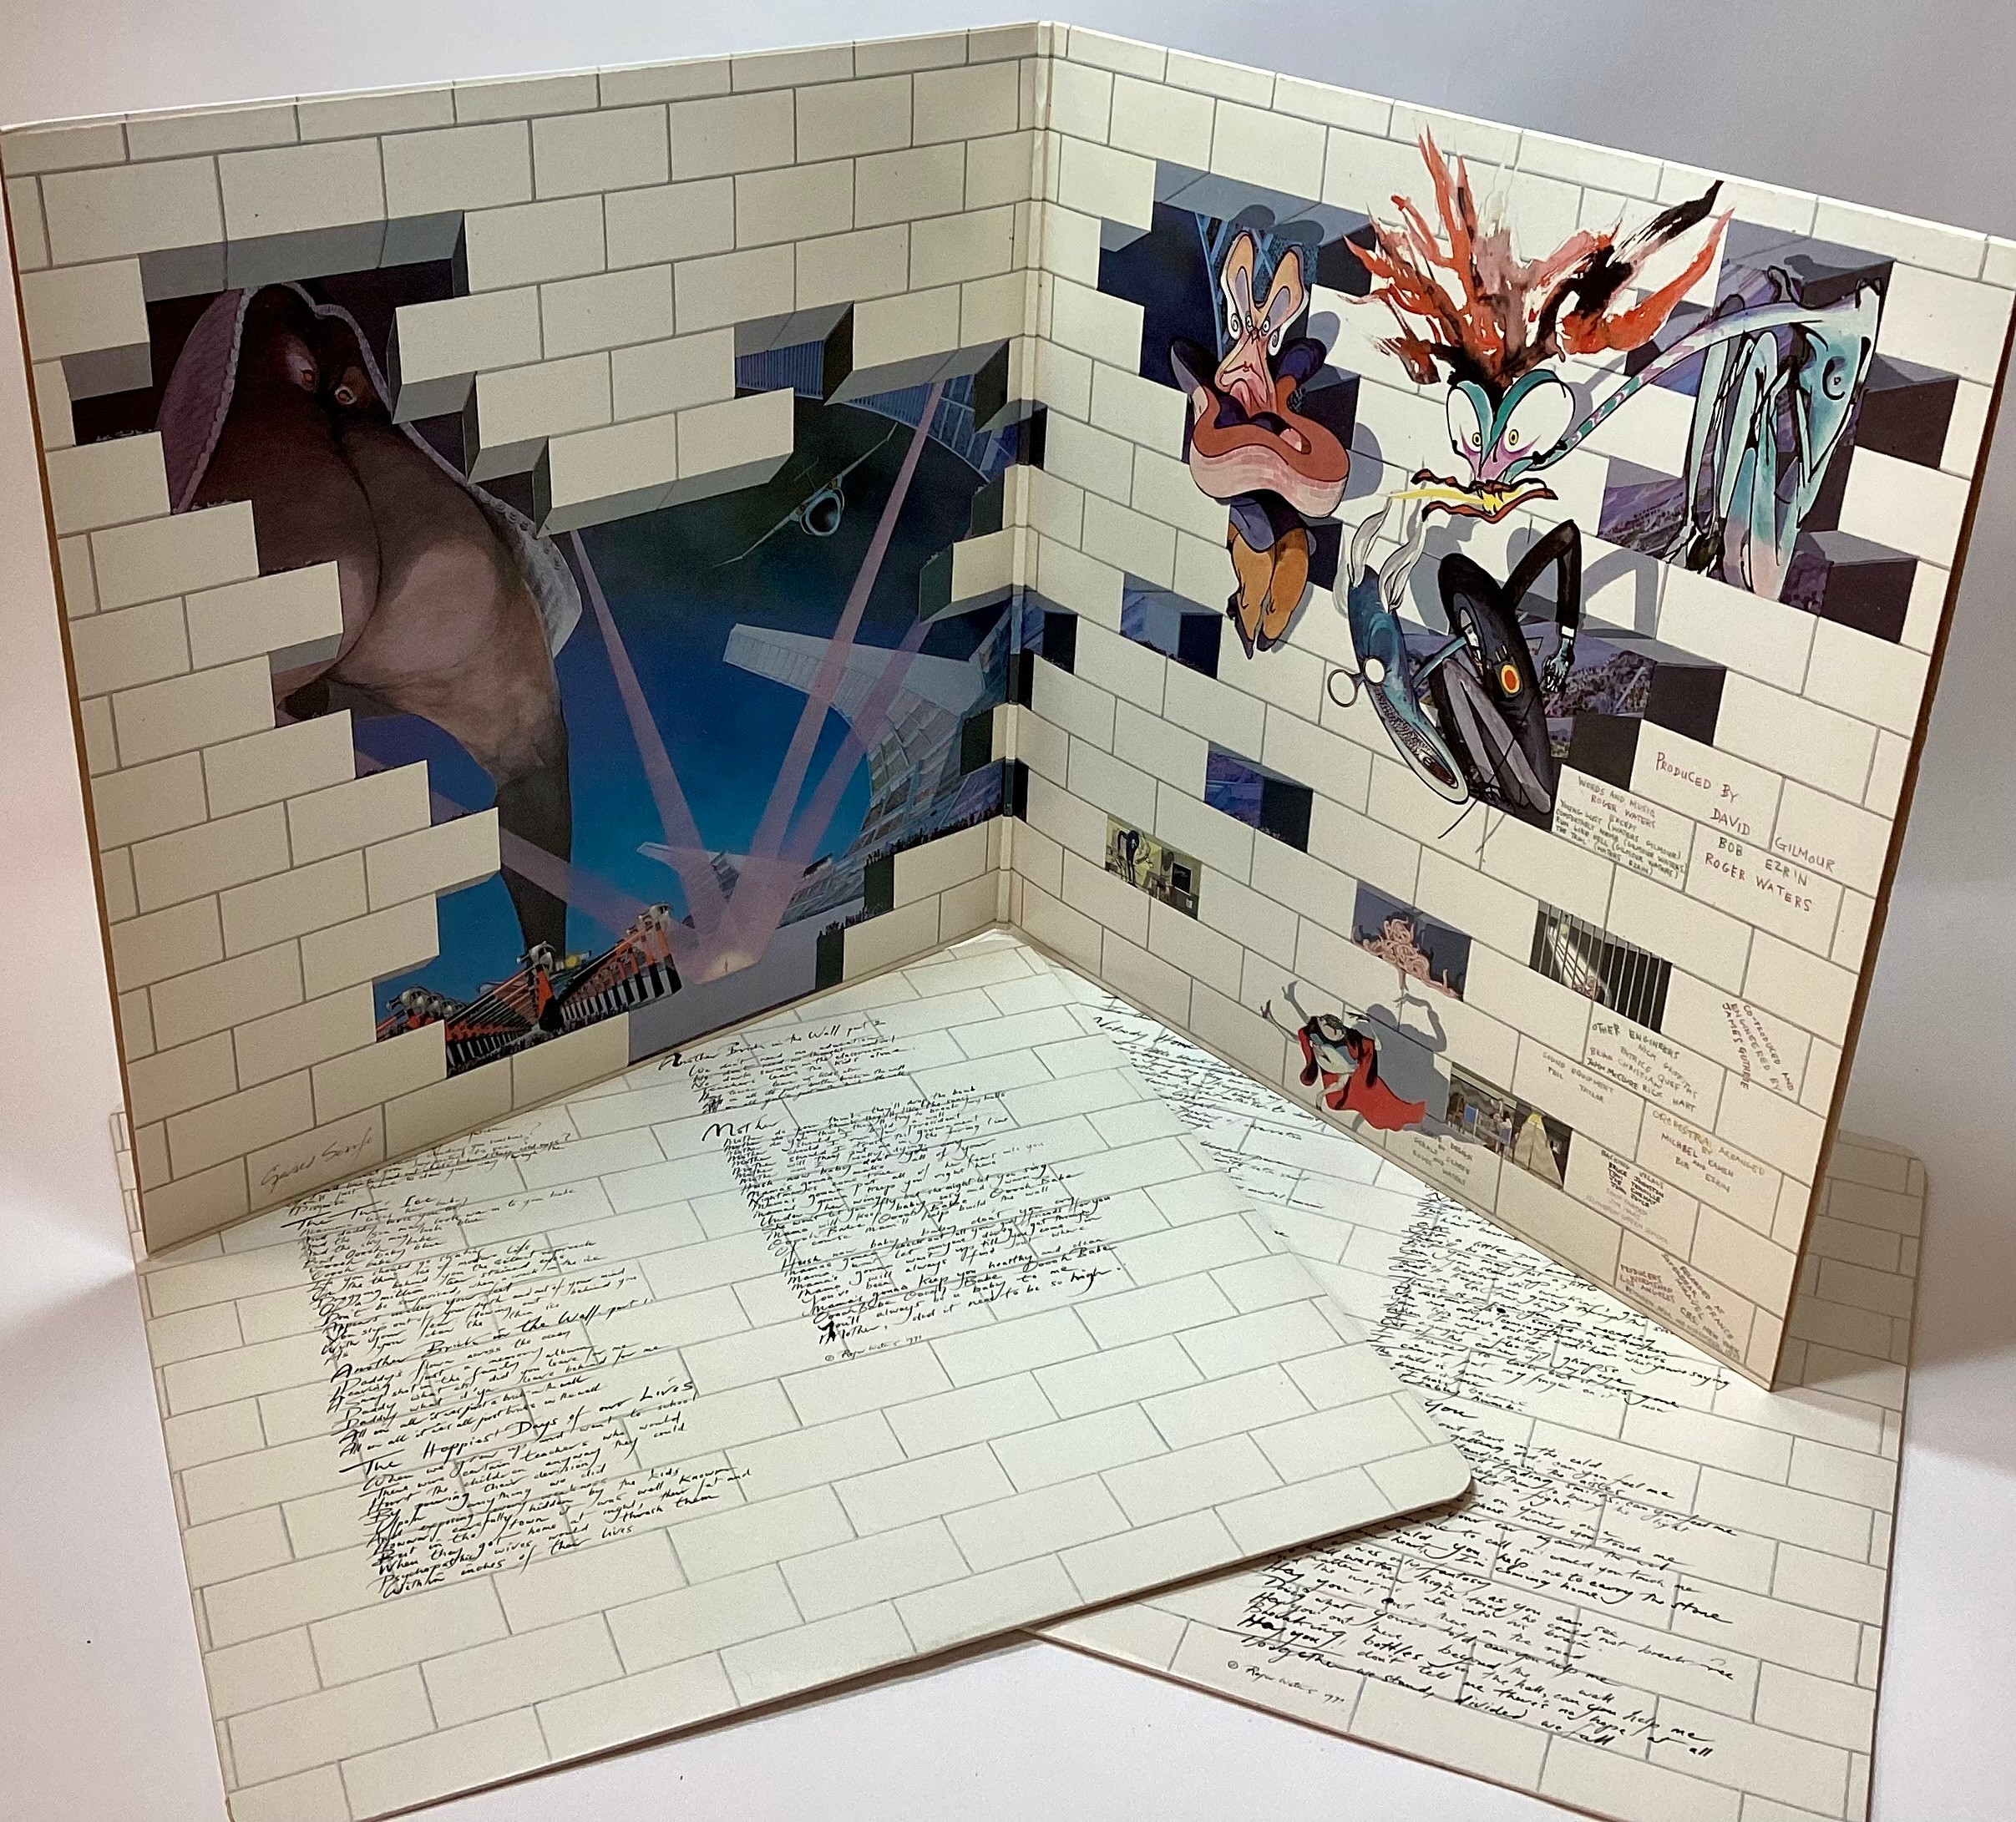 PINK FLOYD ‘THE WALL’ DOUBLE LP RECORD. Released in 1979, "The Wall" stands as one of Pink Floyd's - Image 2 of 6